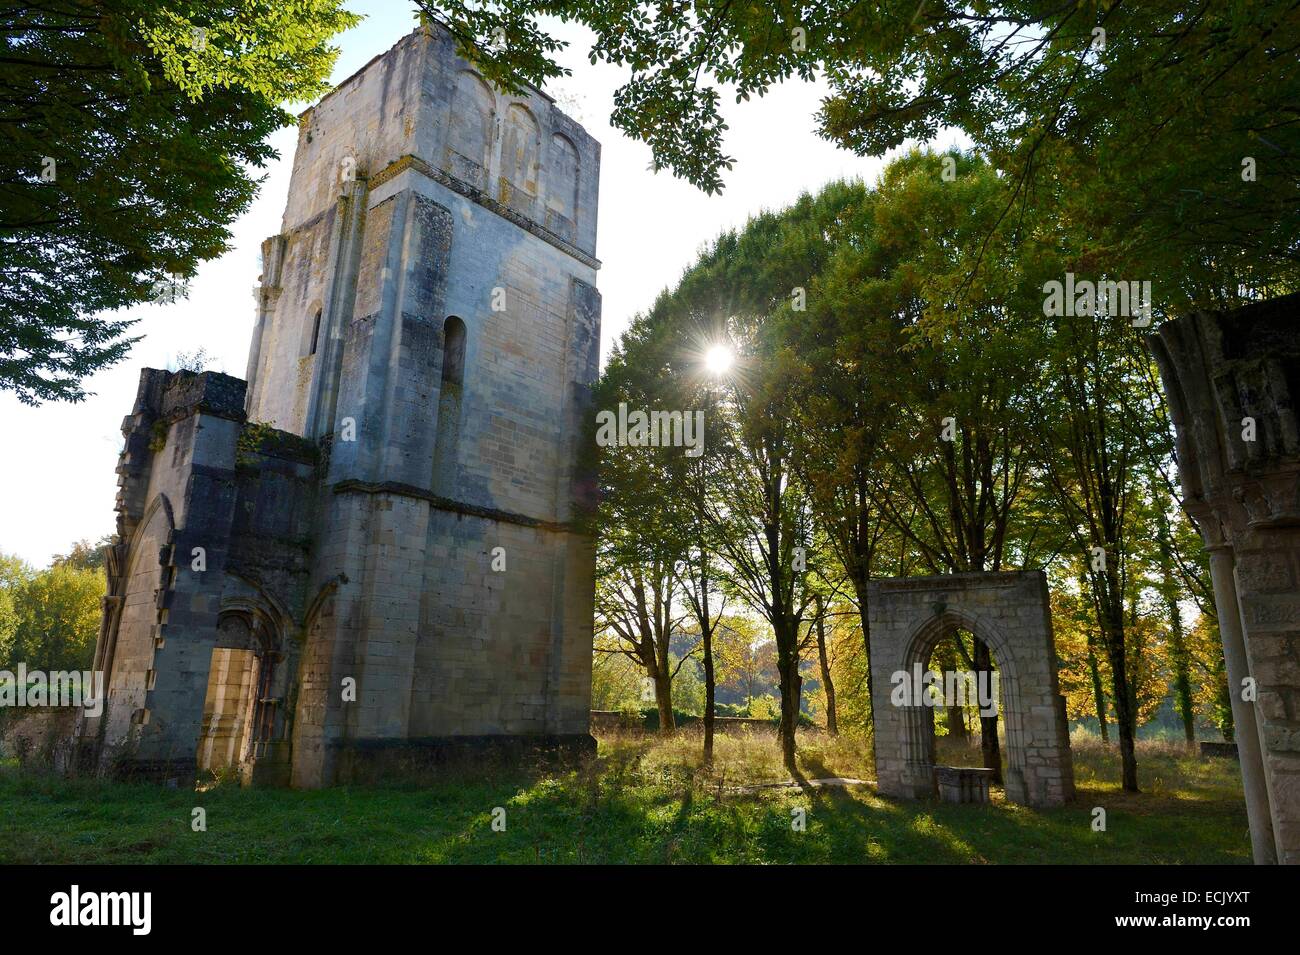 France, Meuse, Verdun, the citadel, the old tower of Saint Vanne that is a vestige of the abbey Stock Photo